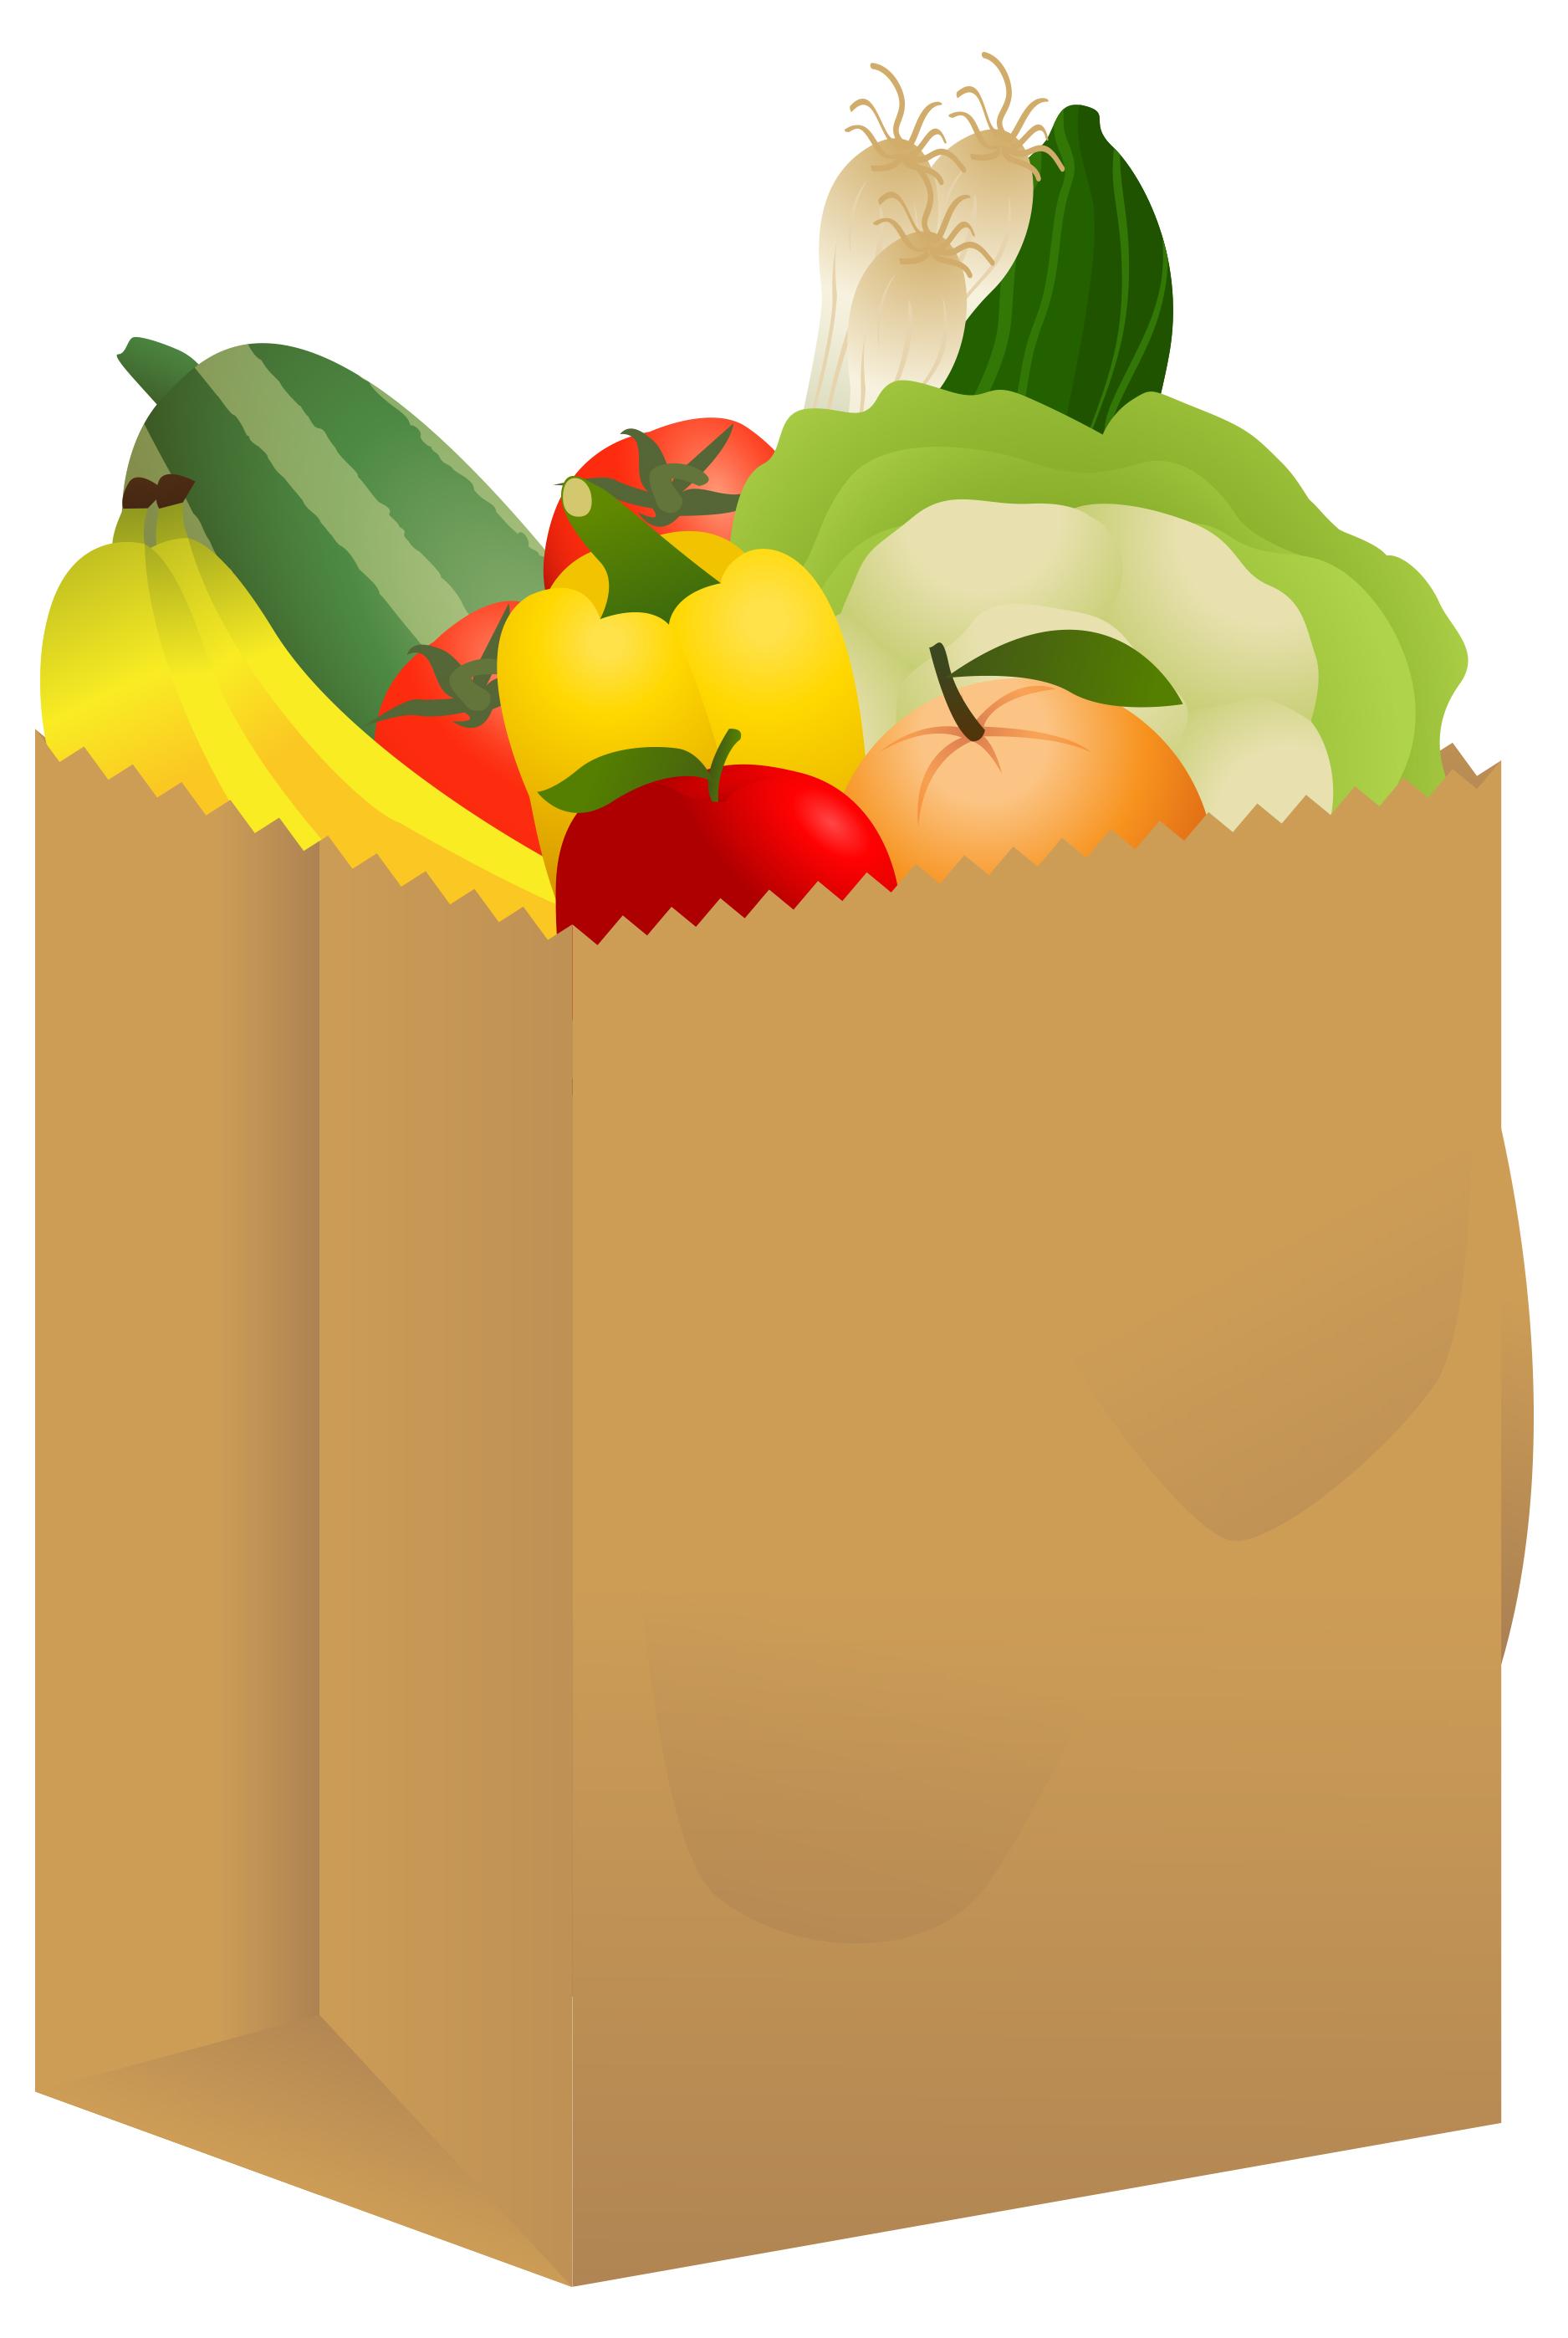 Shopping bags pictures clipartpost. Bag clipart grocery